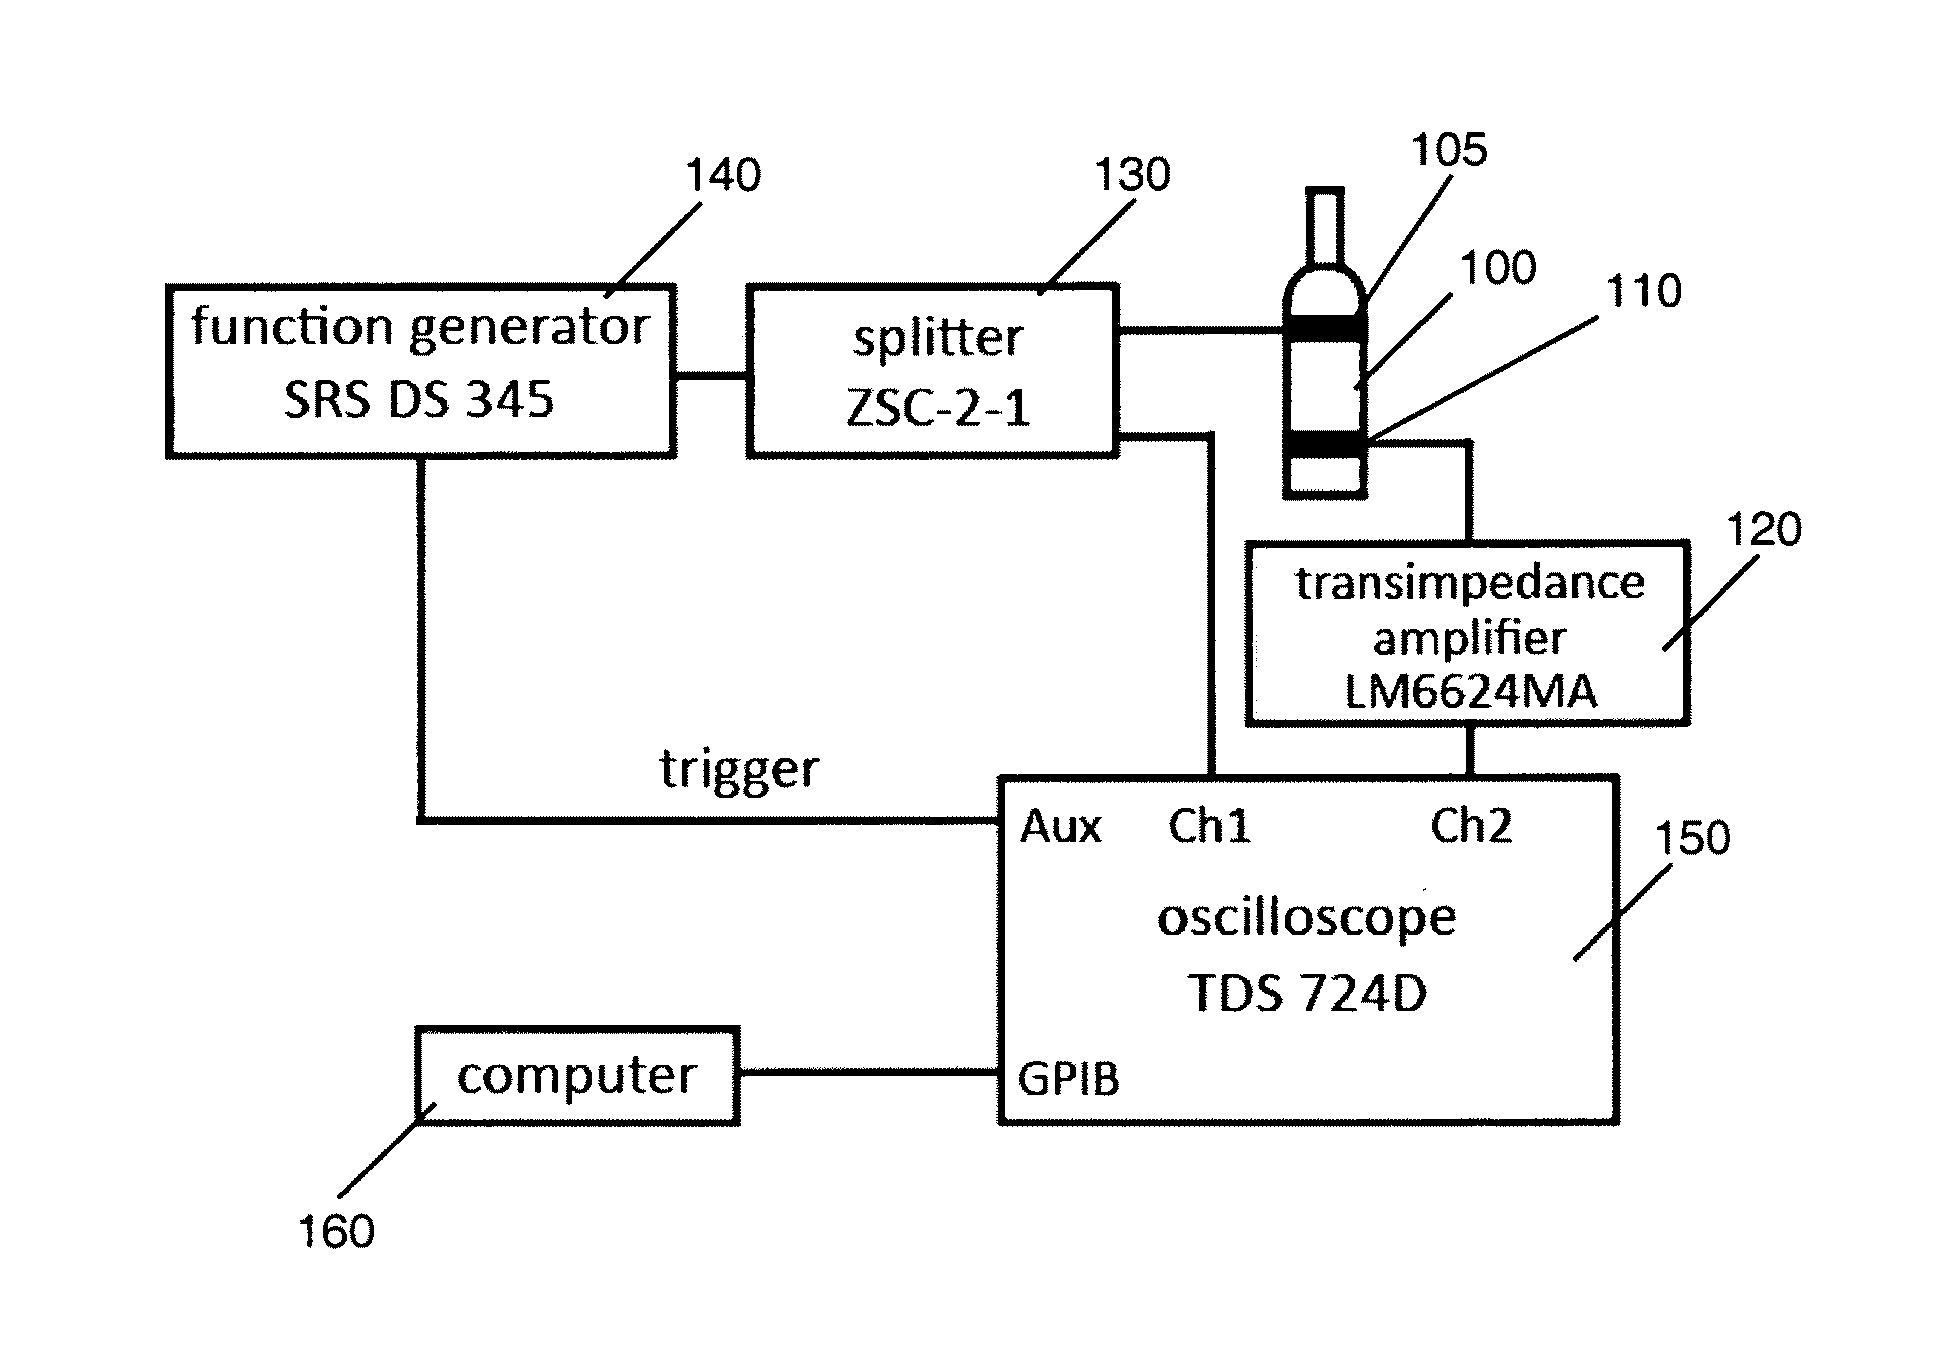 Authentication device for full intact wine bottles